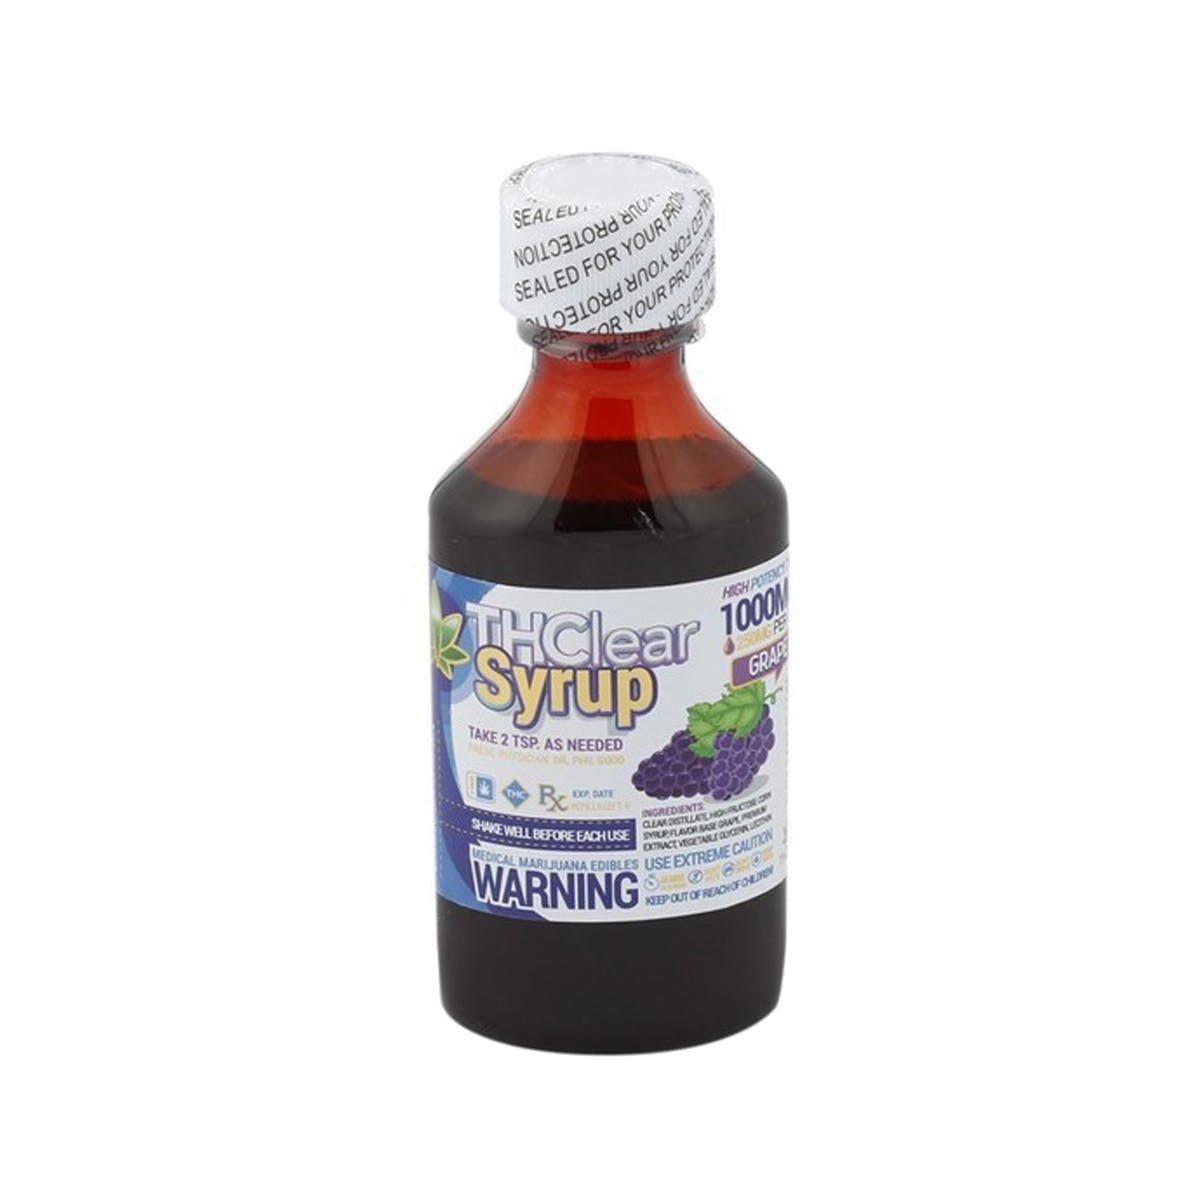 marijuana-dispensaries-greenbuds-collective-in-los-angeles-grape-syrup-1000mg